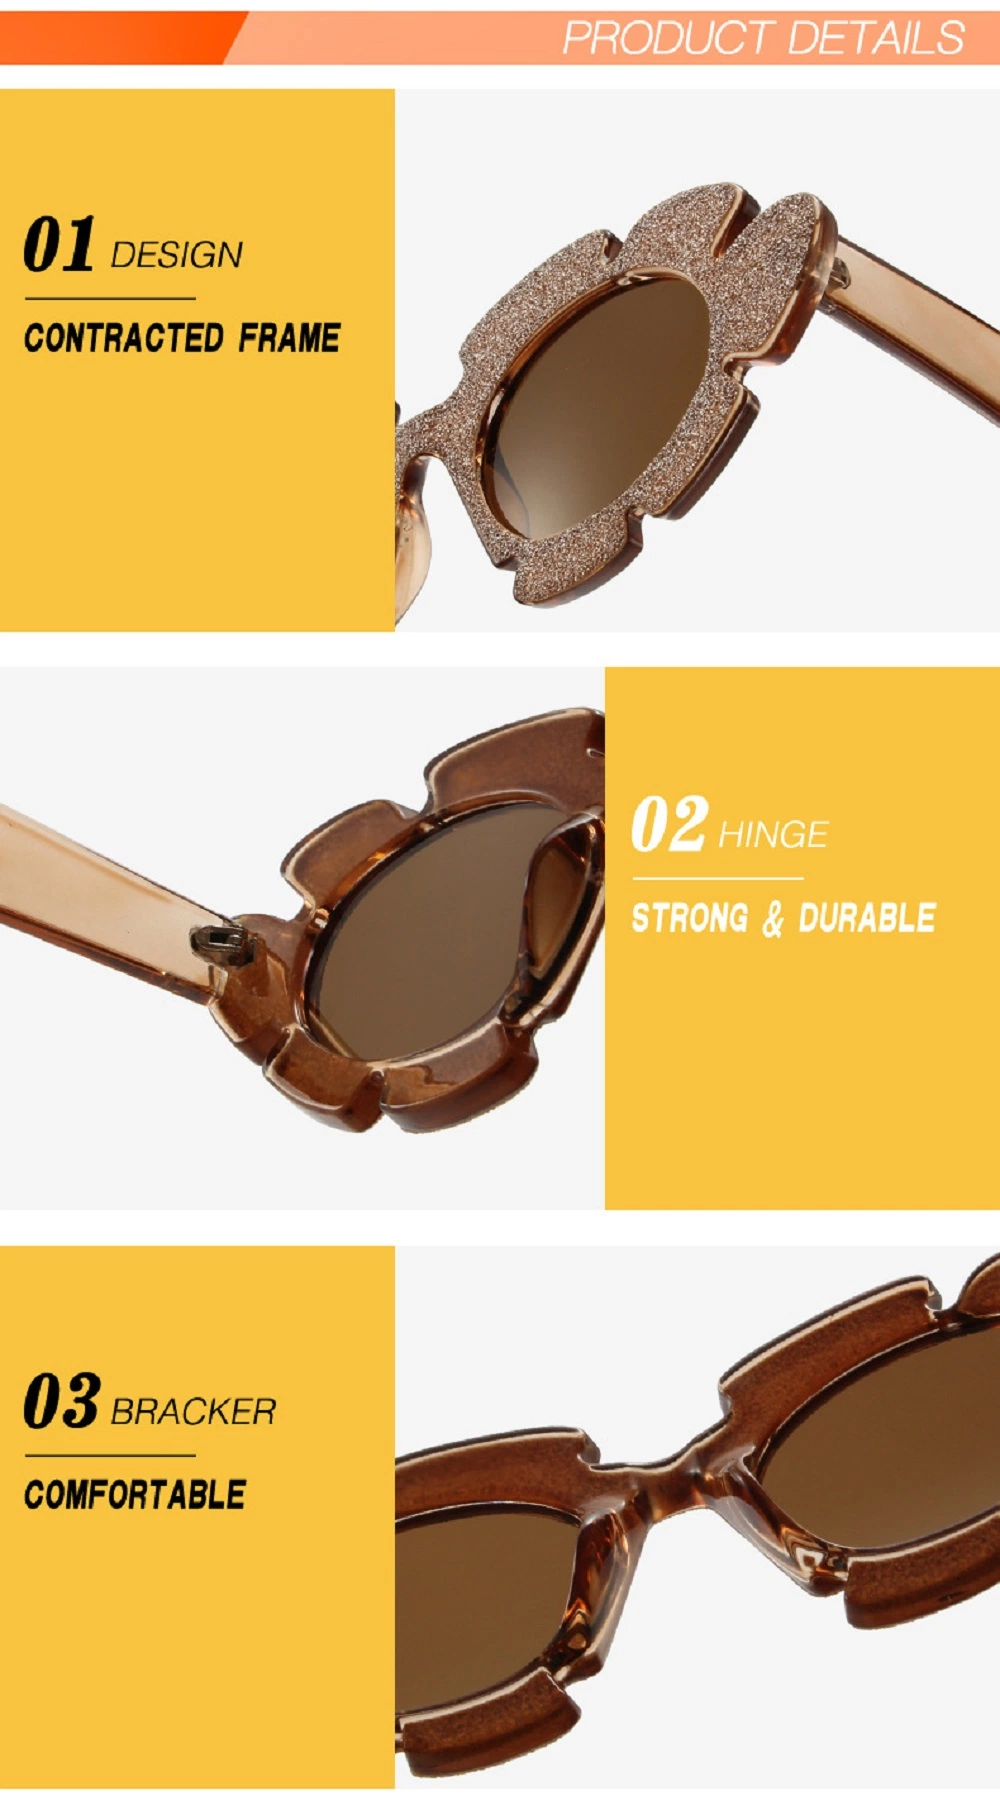 China Factory Wholesale Flower Cateye Sunglasses Hot Party High Quality Personalized Eyeglasses